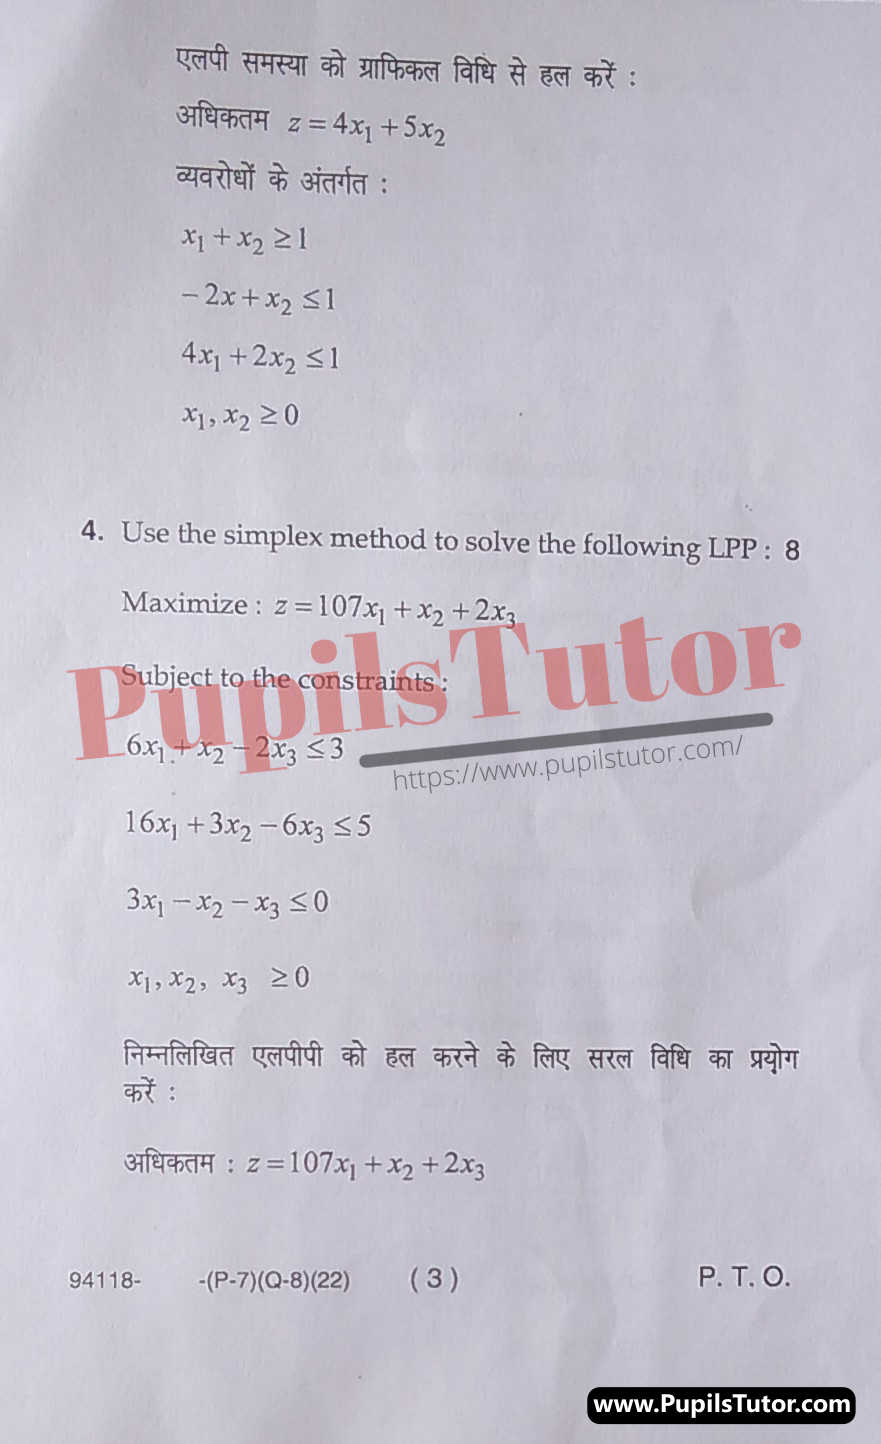 Free Download PDF Of M.D. University B.Sc. [Statistics] Sixth Semester Latest Question Paper For Operation Research Subject (Page 3) - https://www.pupilstutor.com